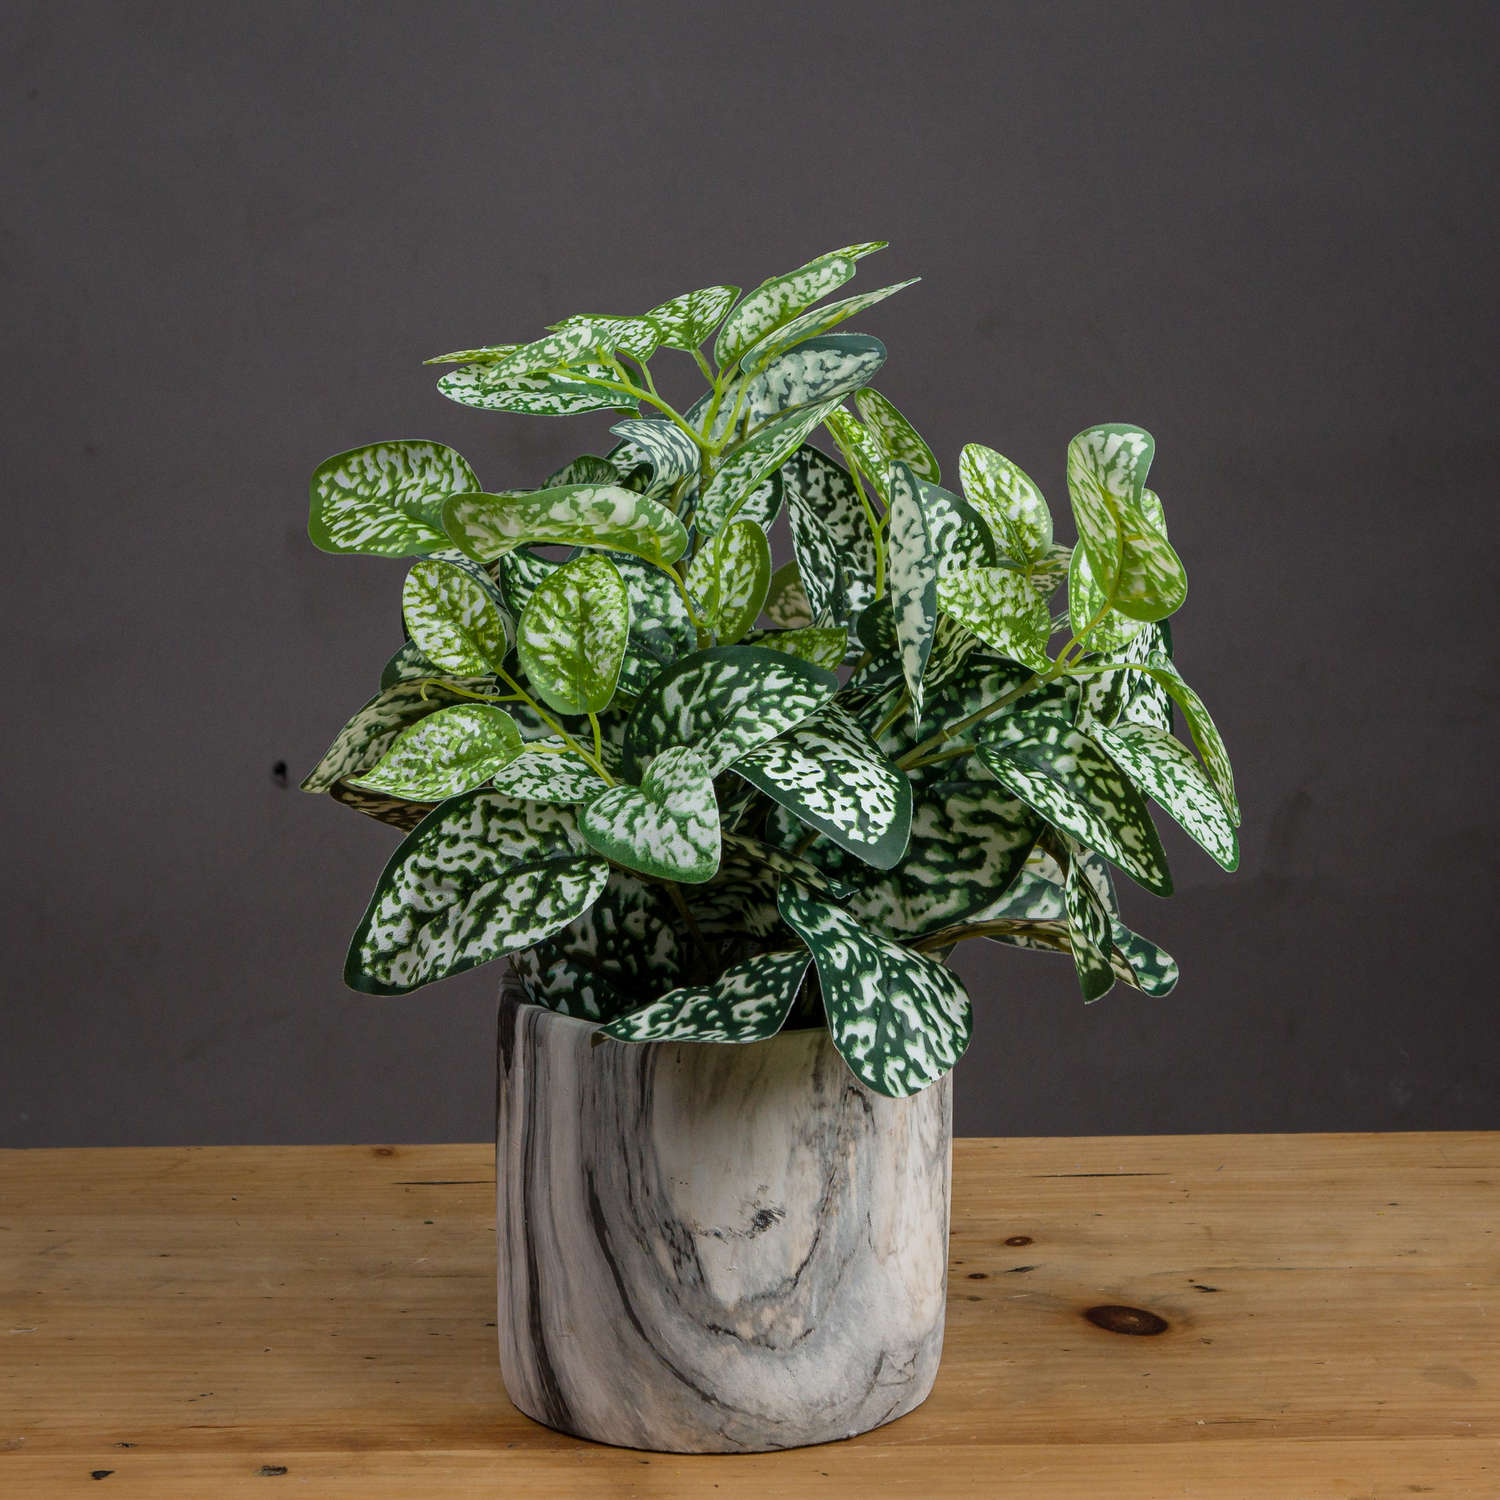 Variegated White And Green Nerve Plant - Image 1